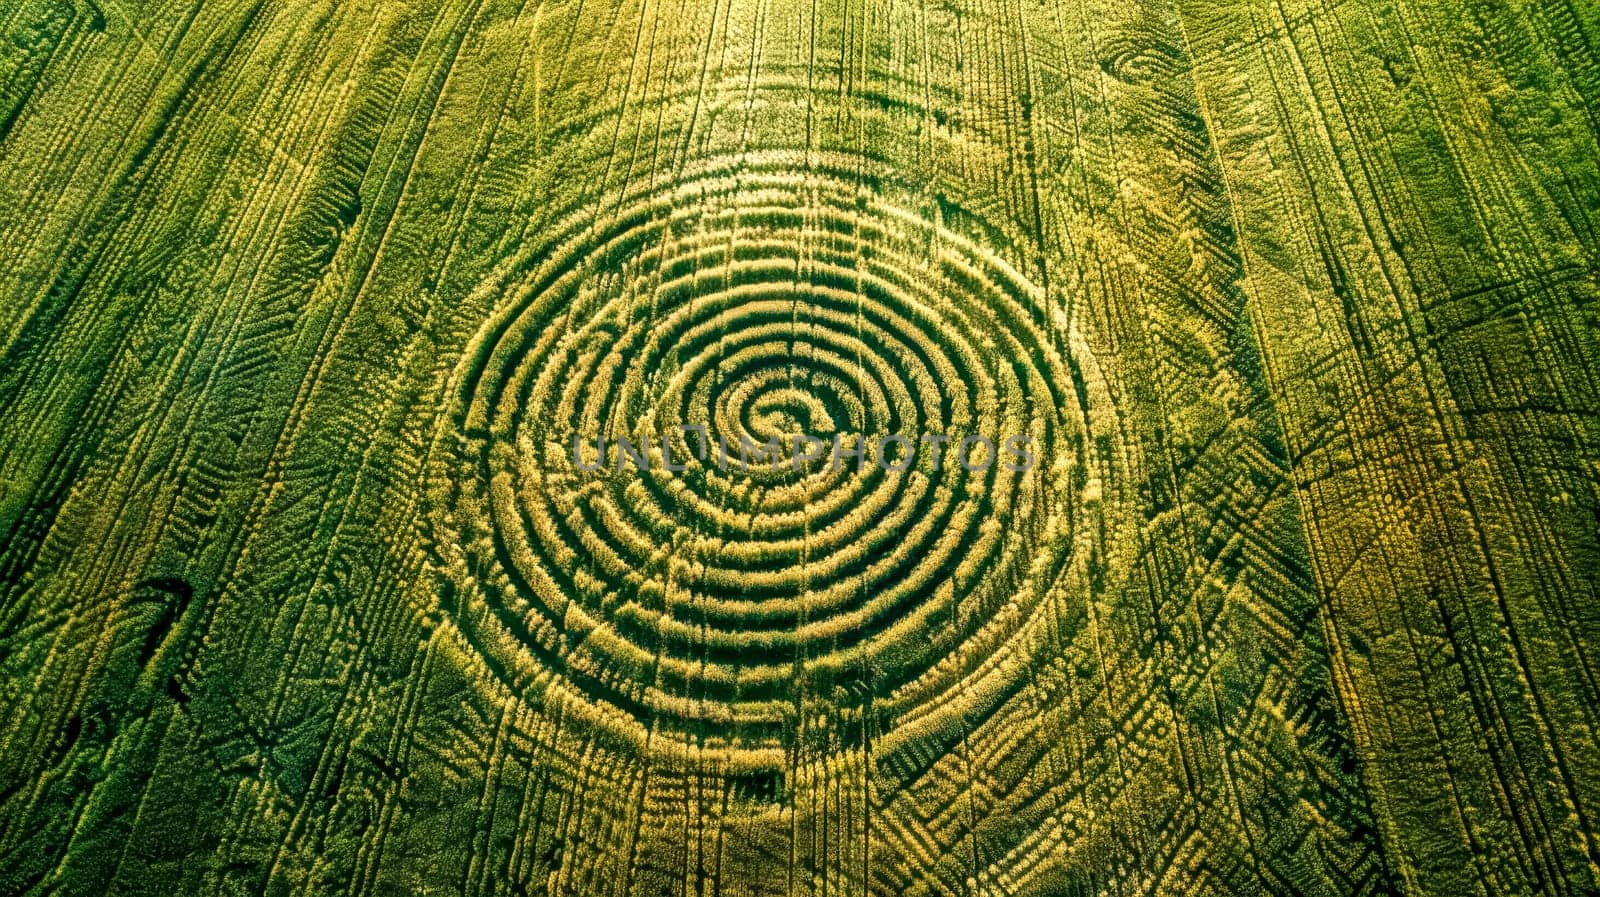 Close-up of the intricate patterns of tree rings revealing the age and history of a tree